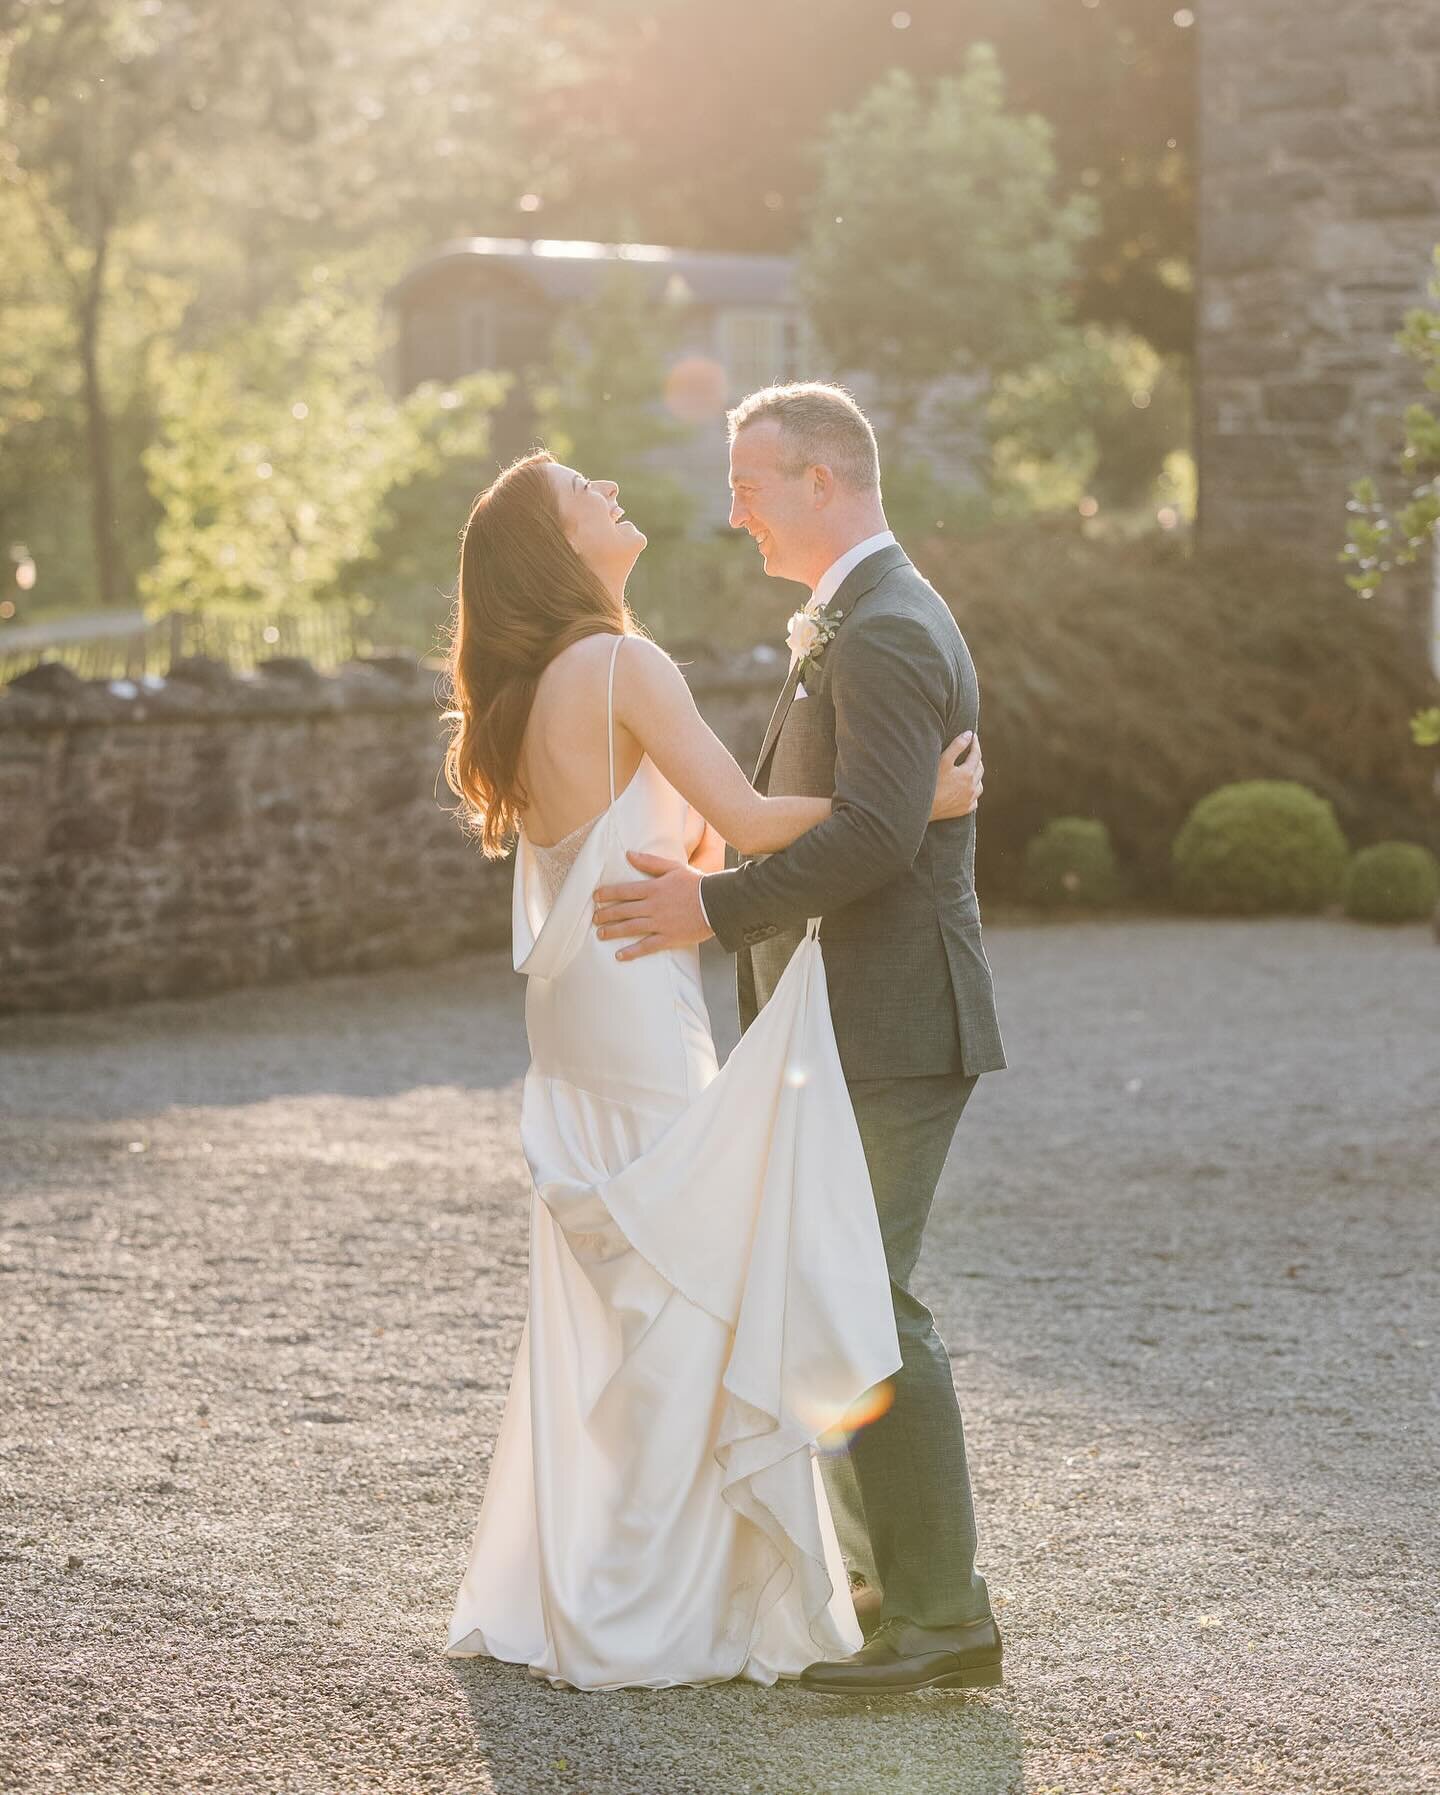 With all these storms I&rsquo;m thinking about warmer and sunnier days! Spring can&rsquo;t come soon enough, even though this beautiful relaxed wedding in @virginia_park_lodge is from September :) I loved Ailbhe &amp; Seamus&rsquo;s relaxed approach 